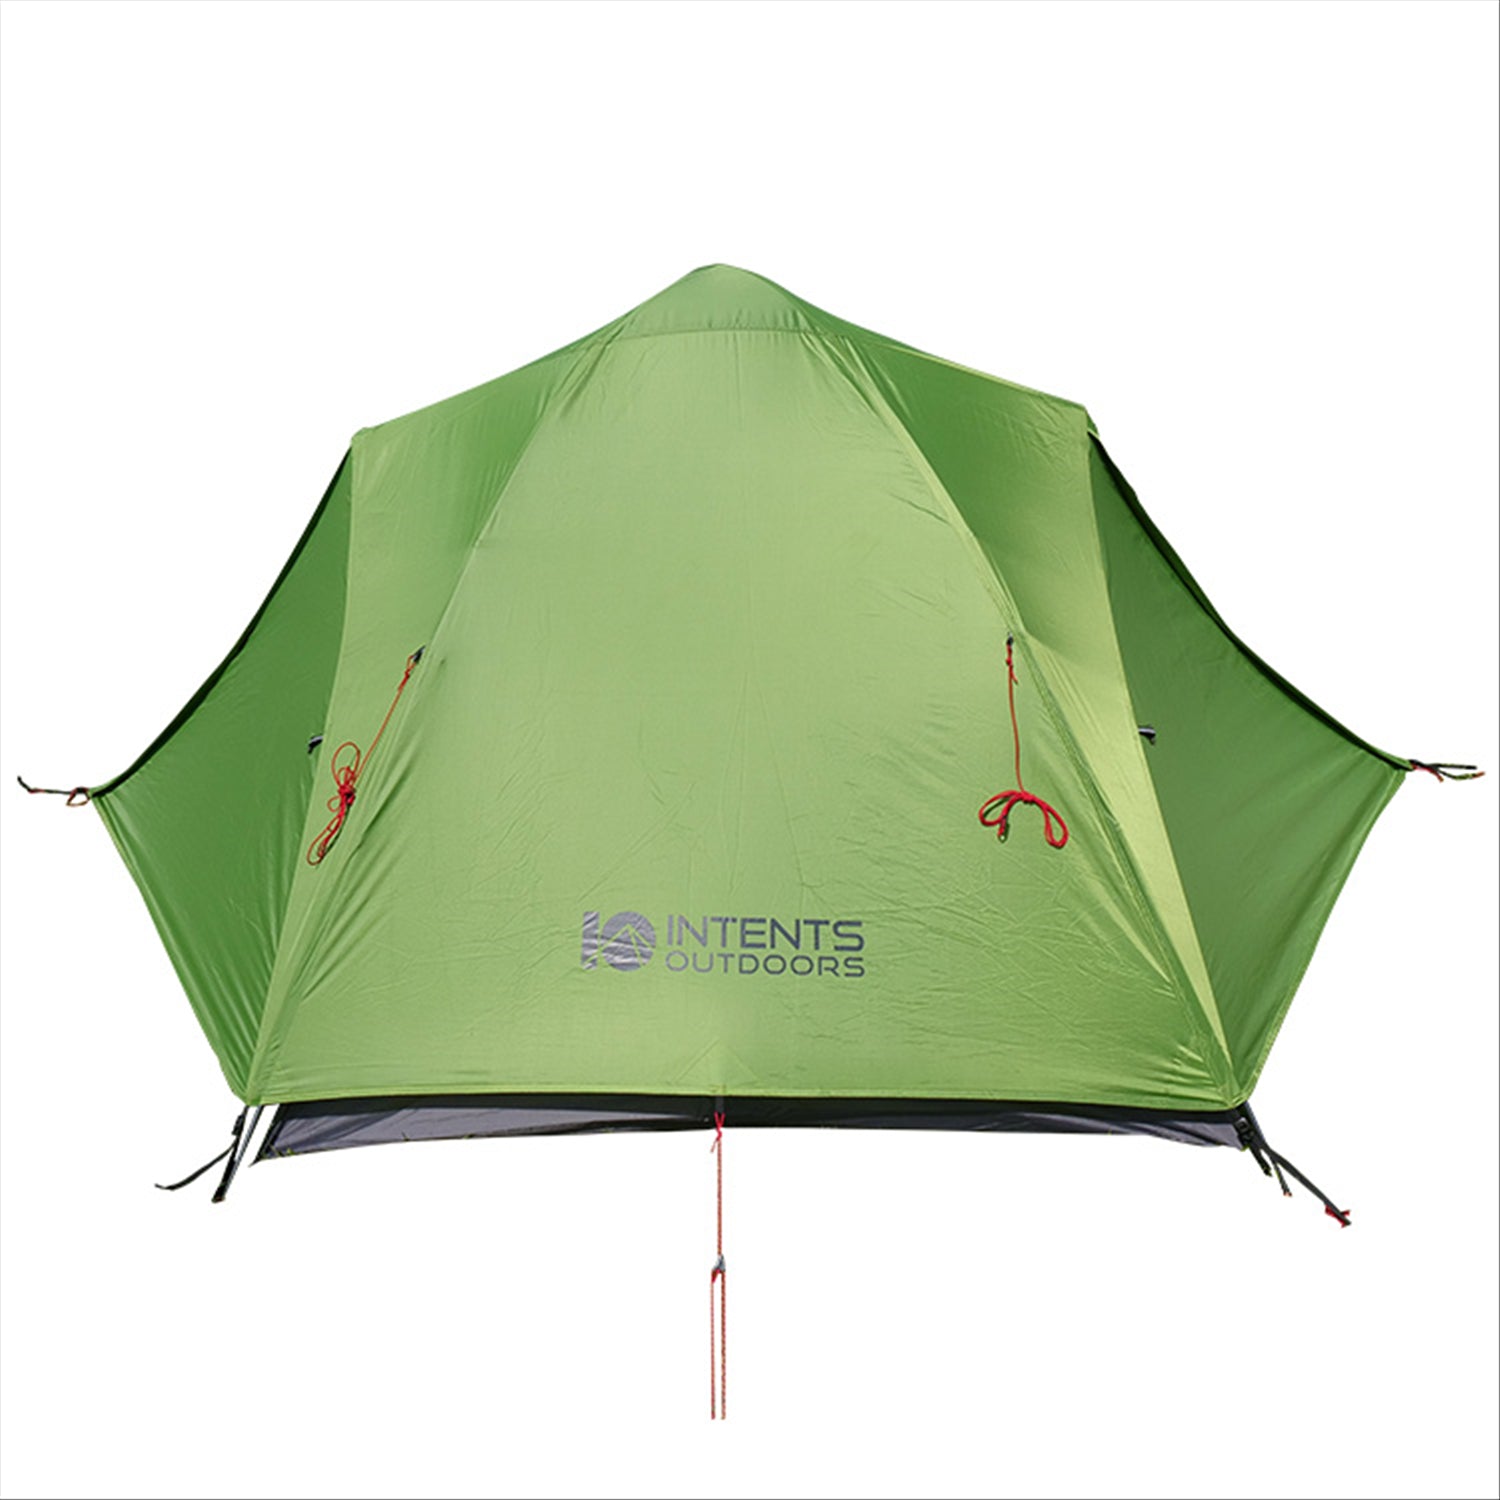 Intents Outdoors MCX 2 - Lightweight 2 Person Tent, 2.45kg